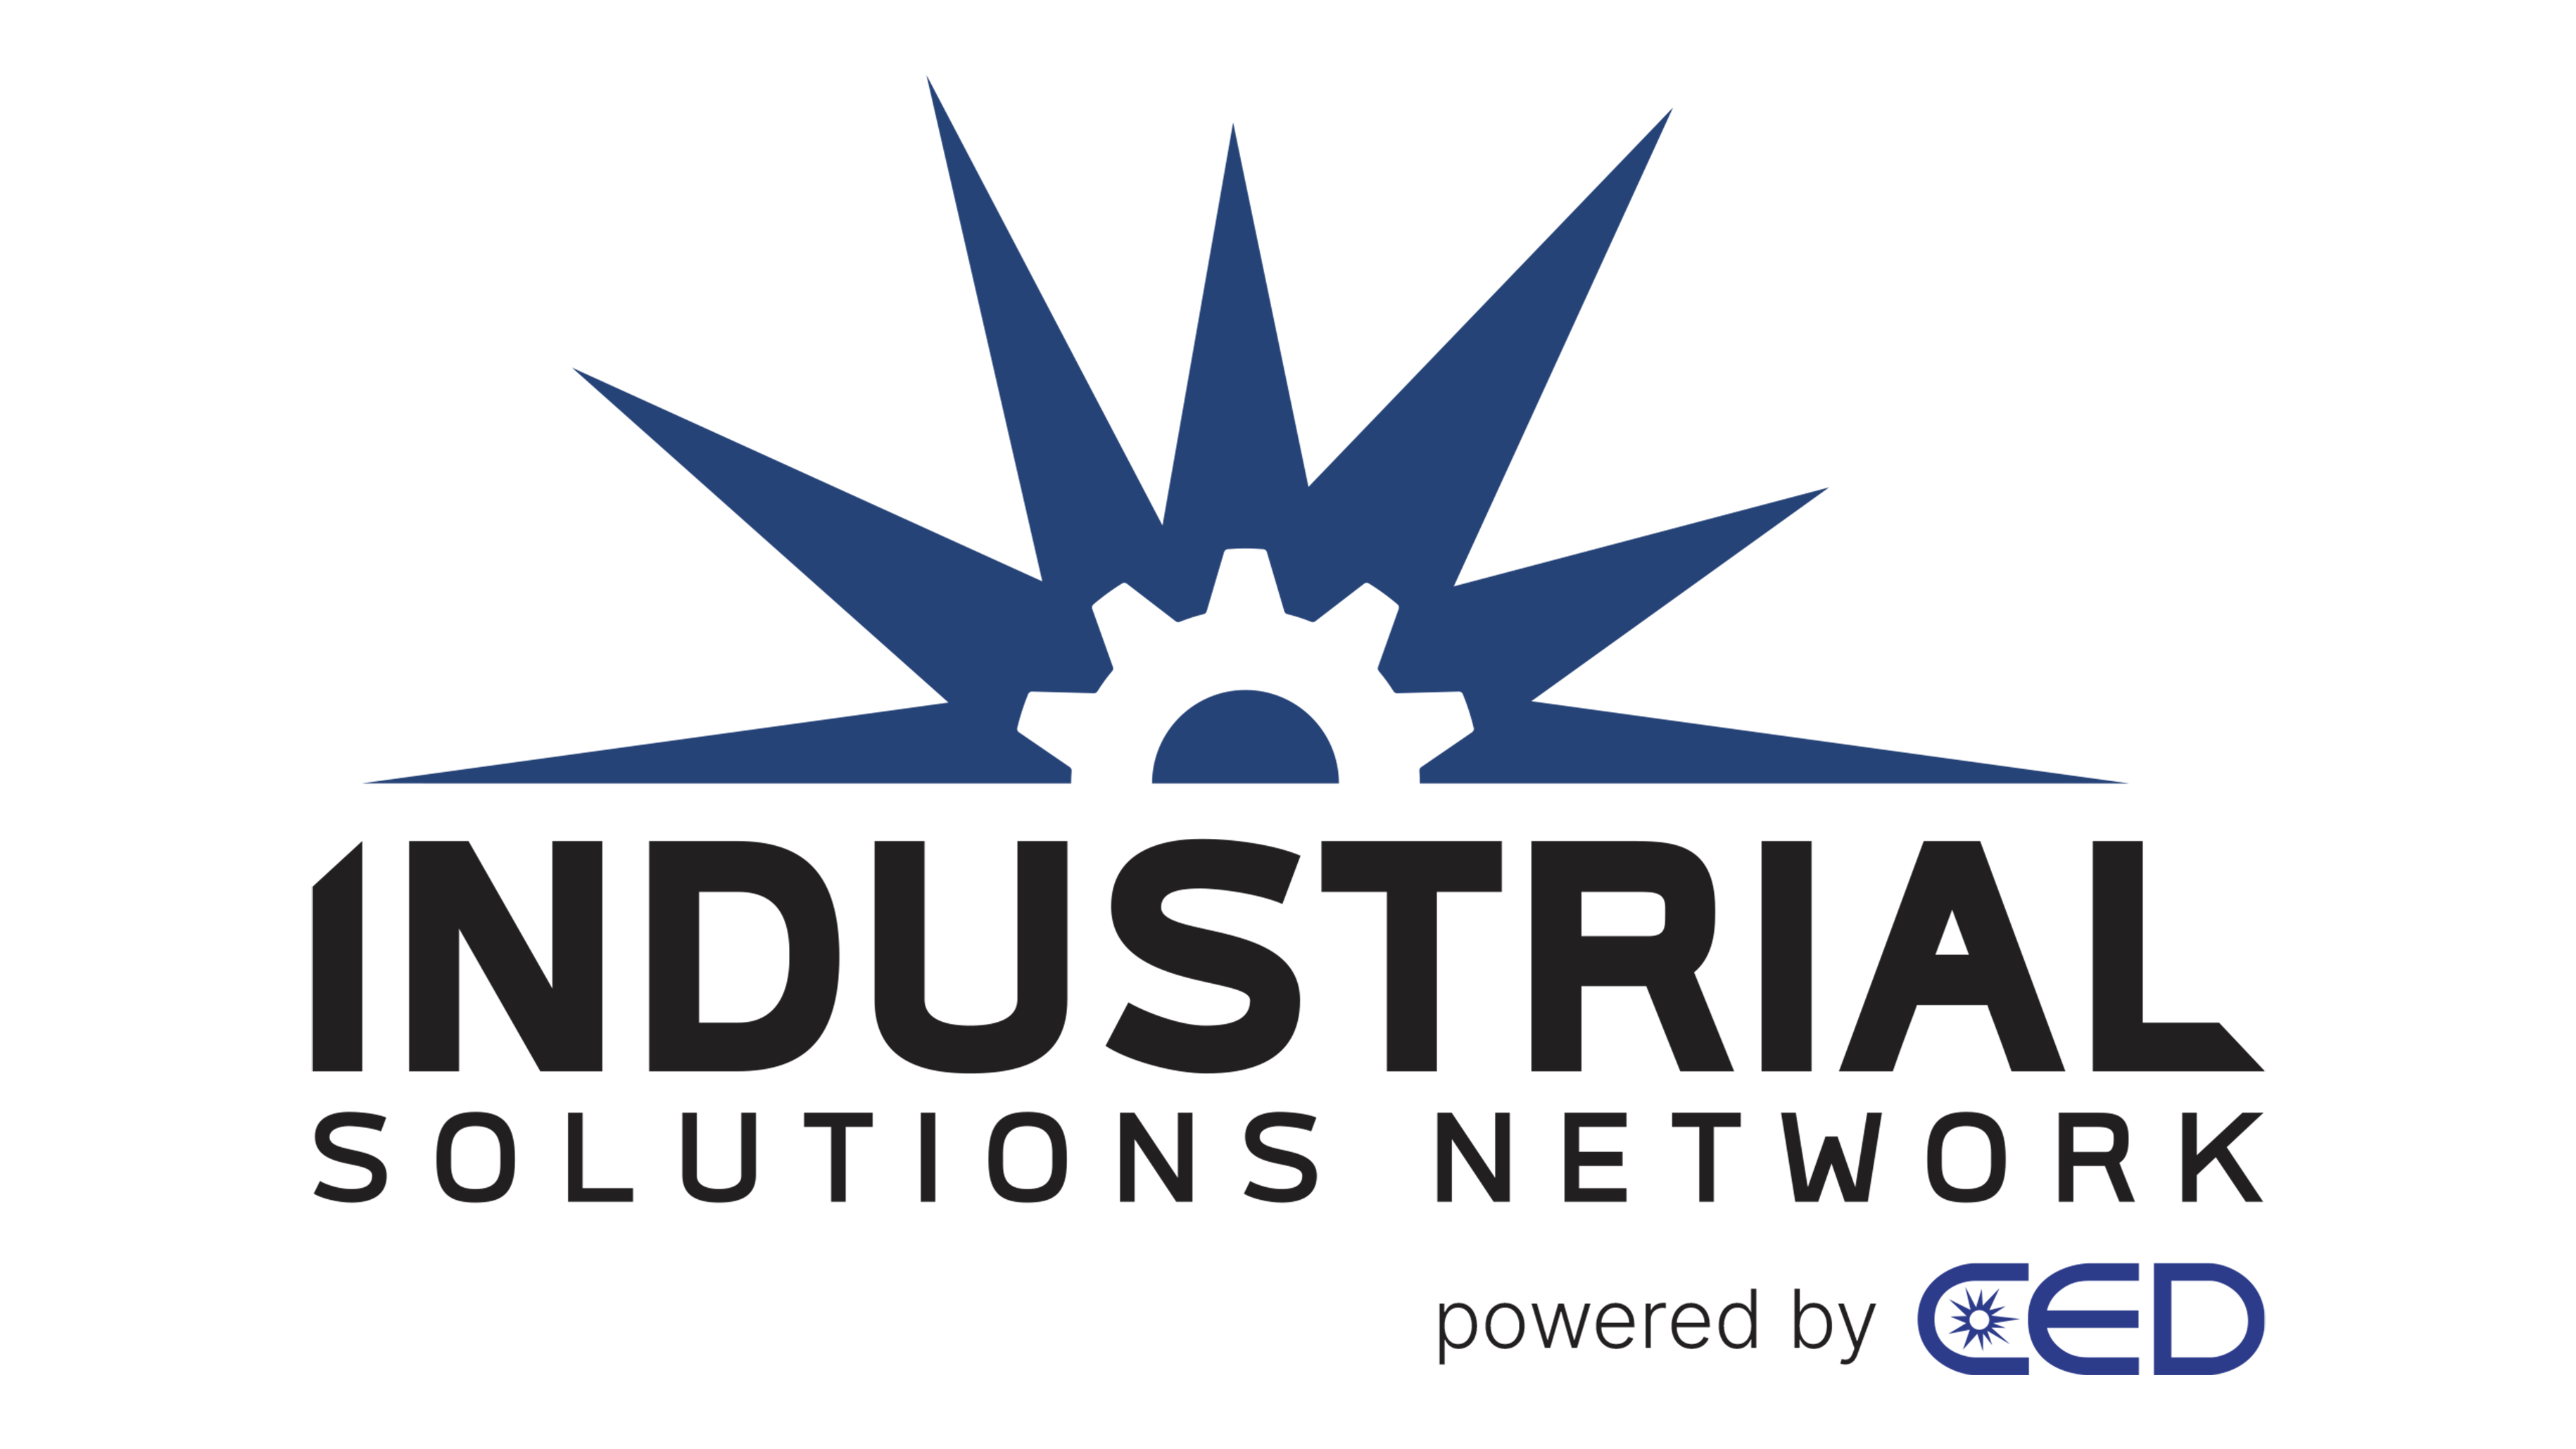 Industrial Solutions Network ISN powered by CED logo